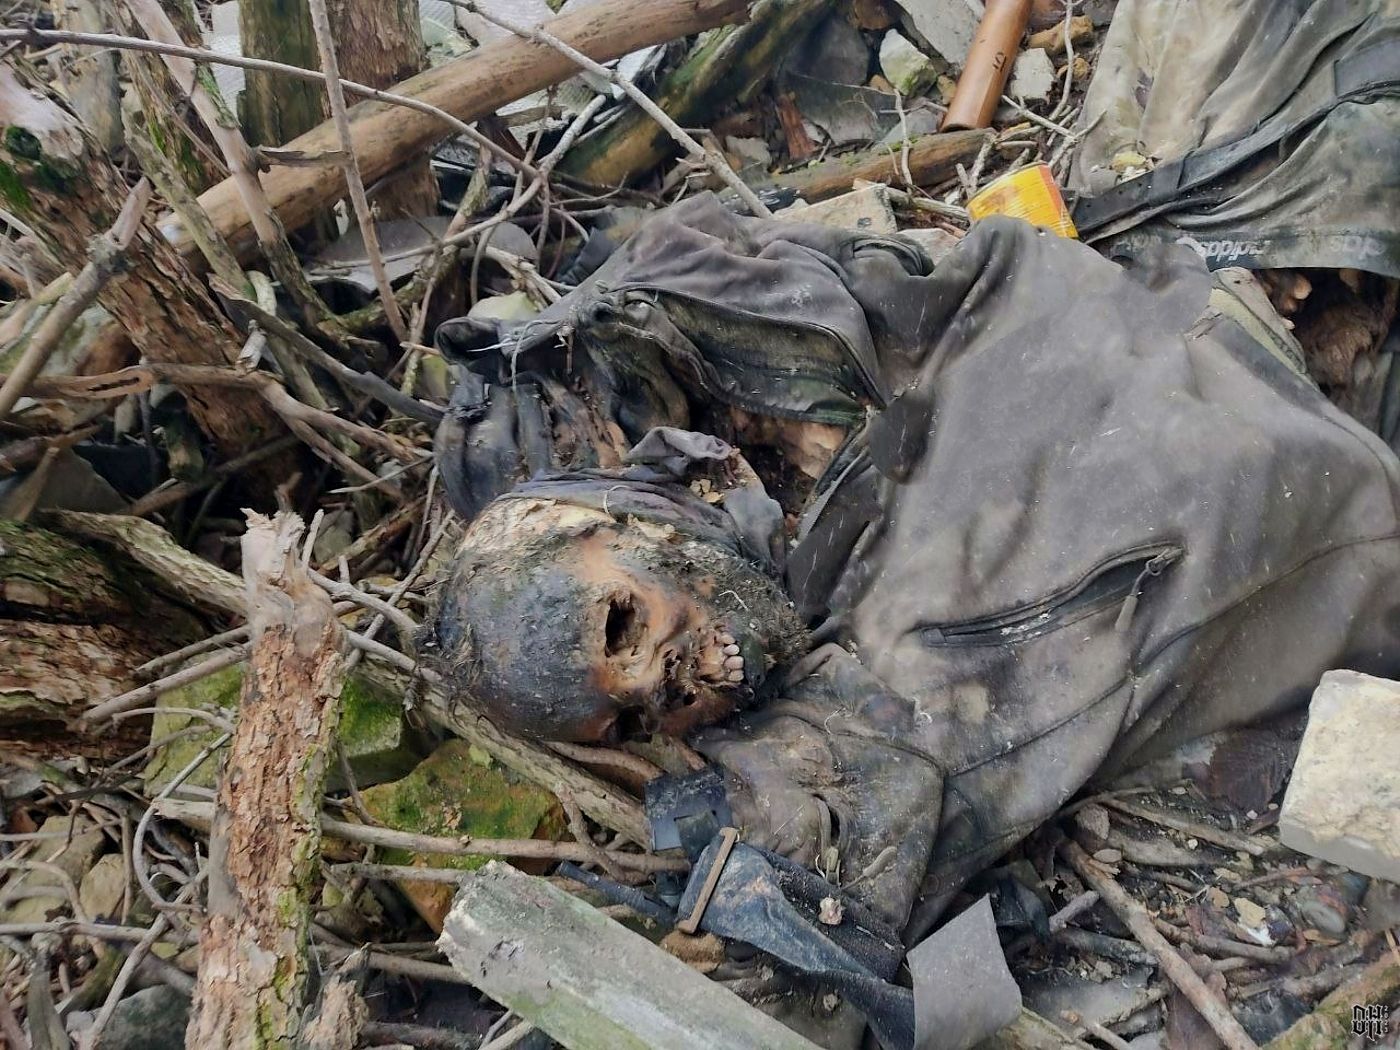 DH - Sldiers' Horror Faces and Bodies of Russia-Ukraine Conflict 13.jpg